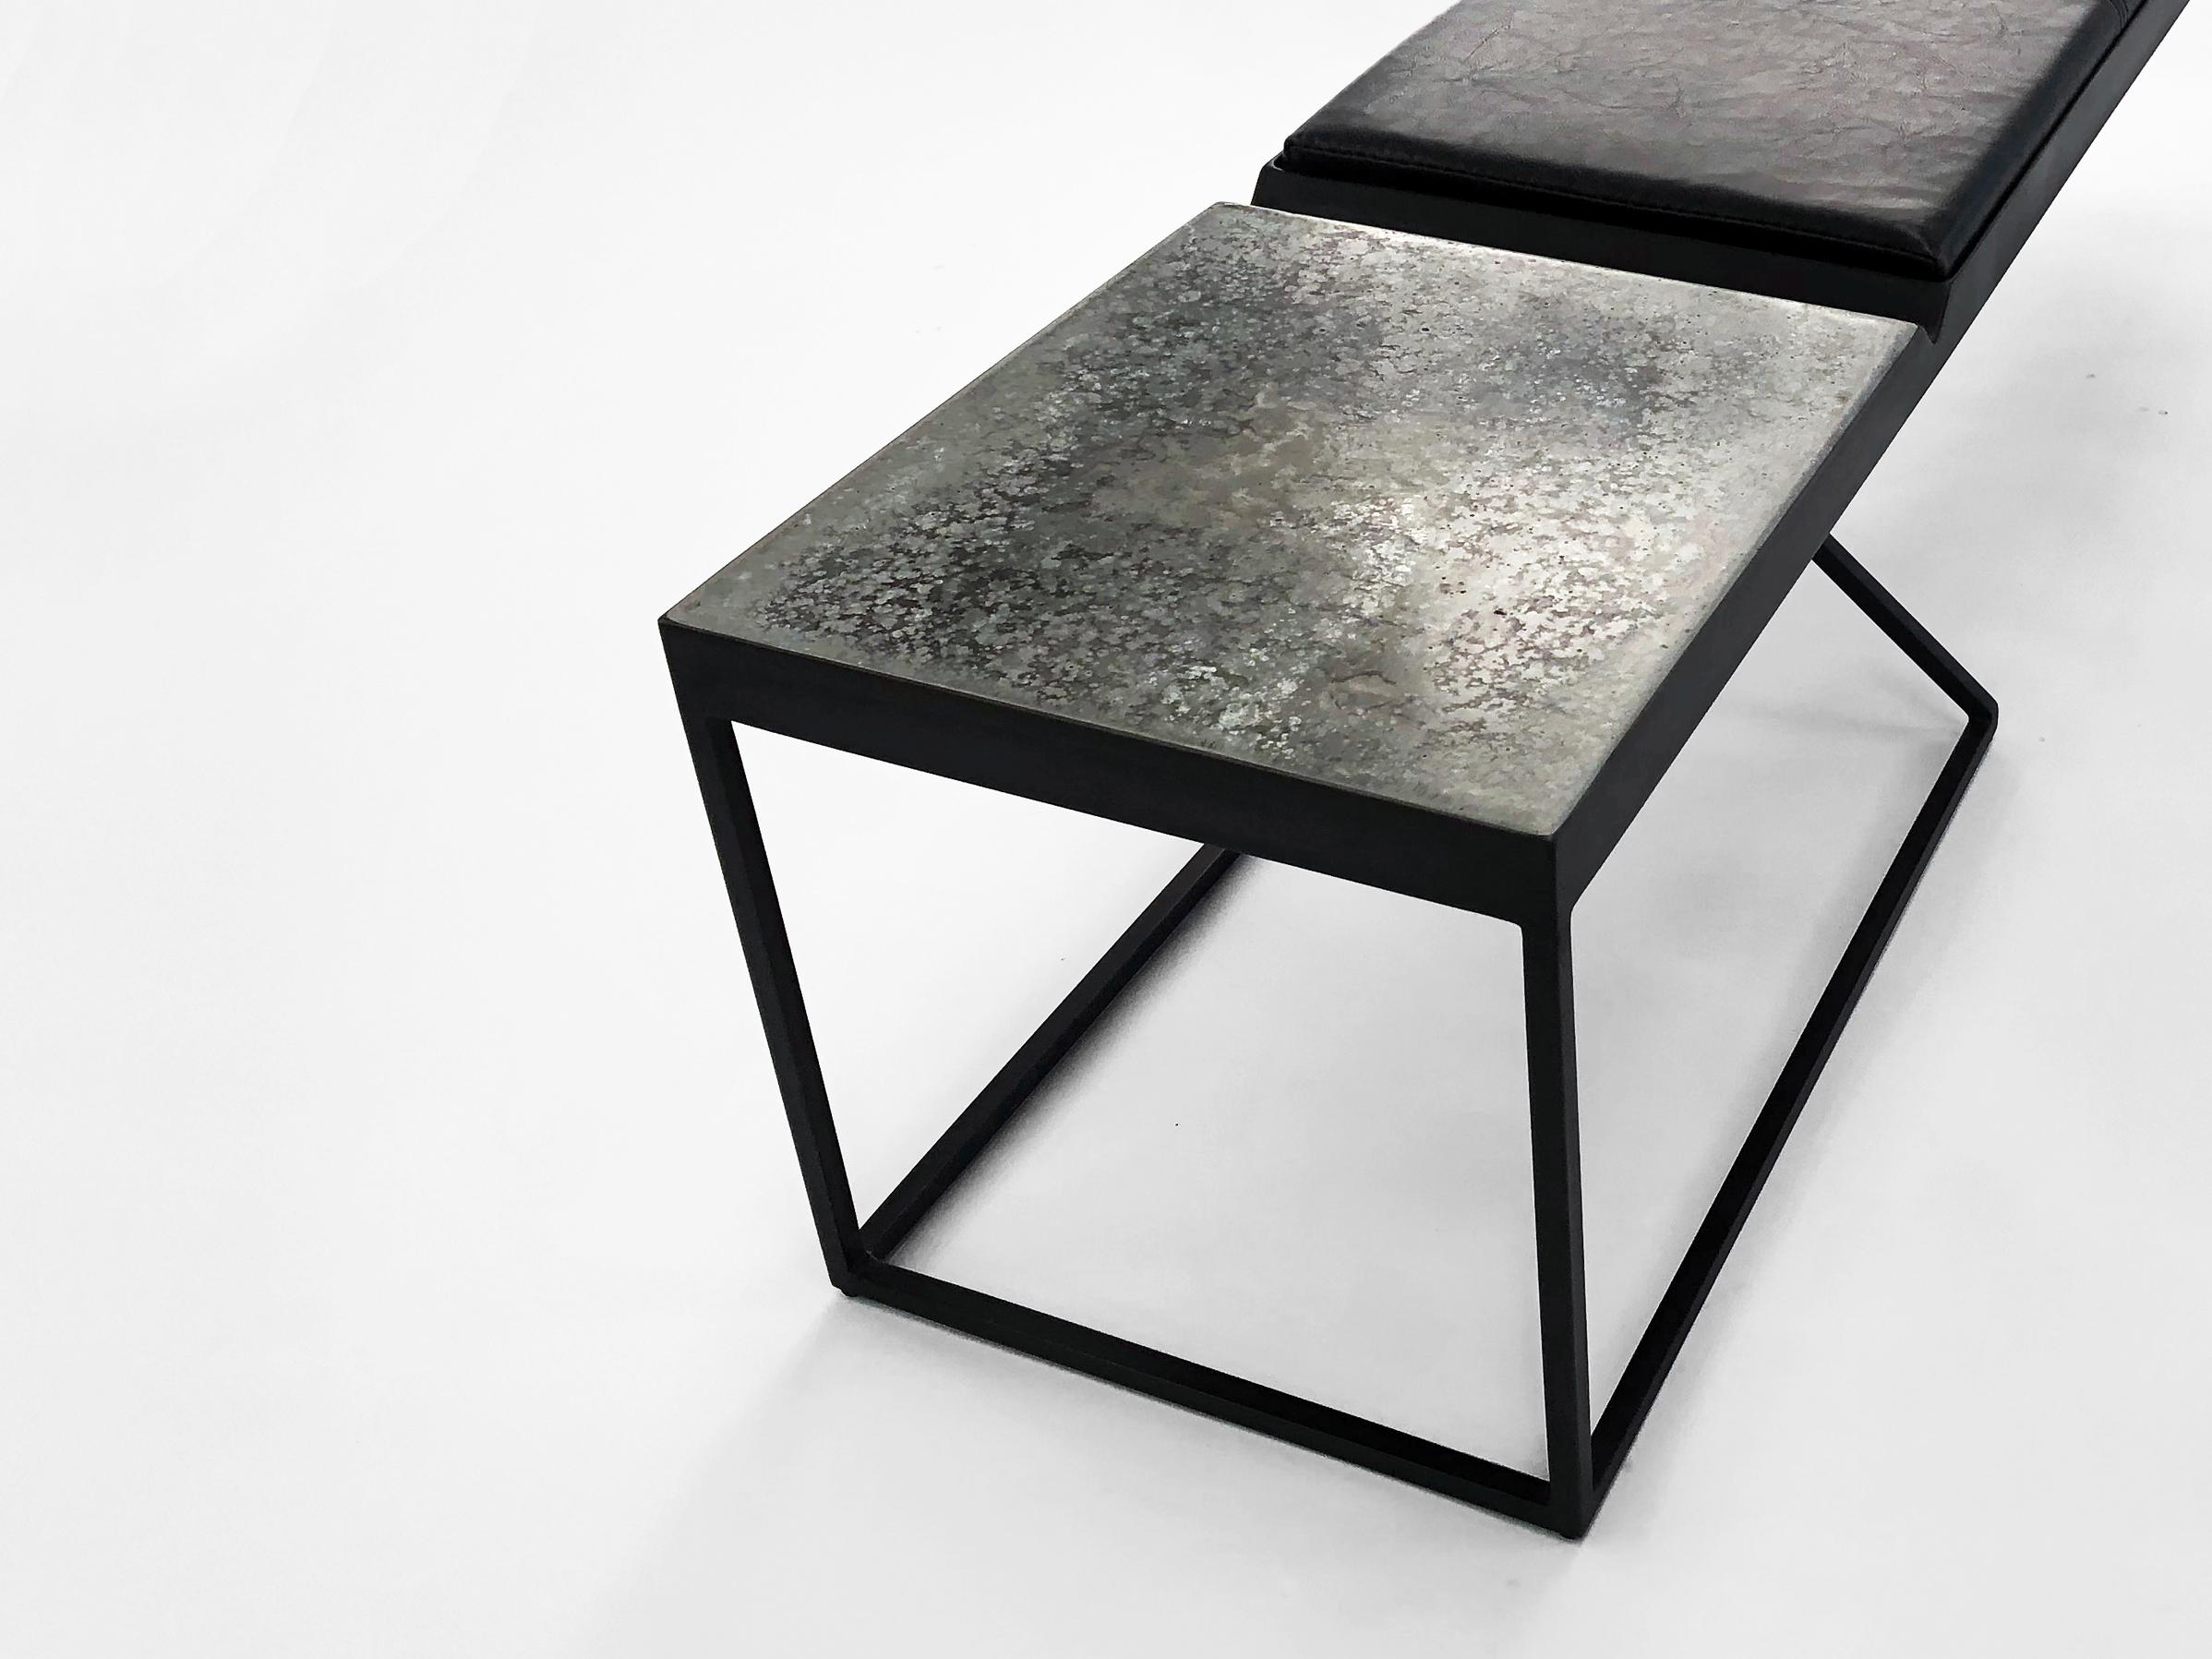 American Grey Bird Bench, Concrete + Steel Collection from Joshua Howe Design